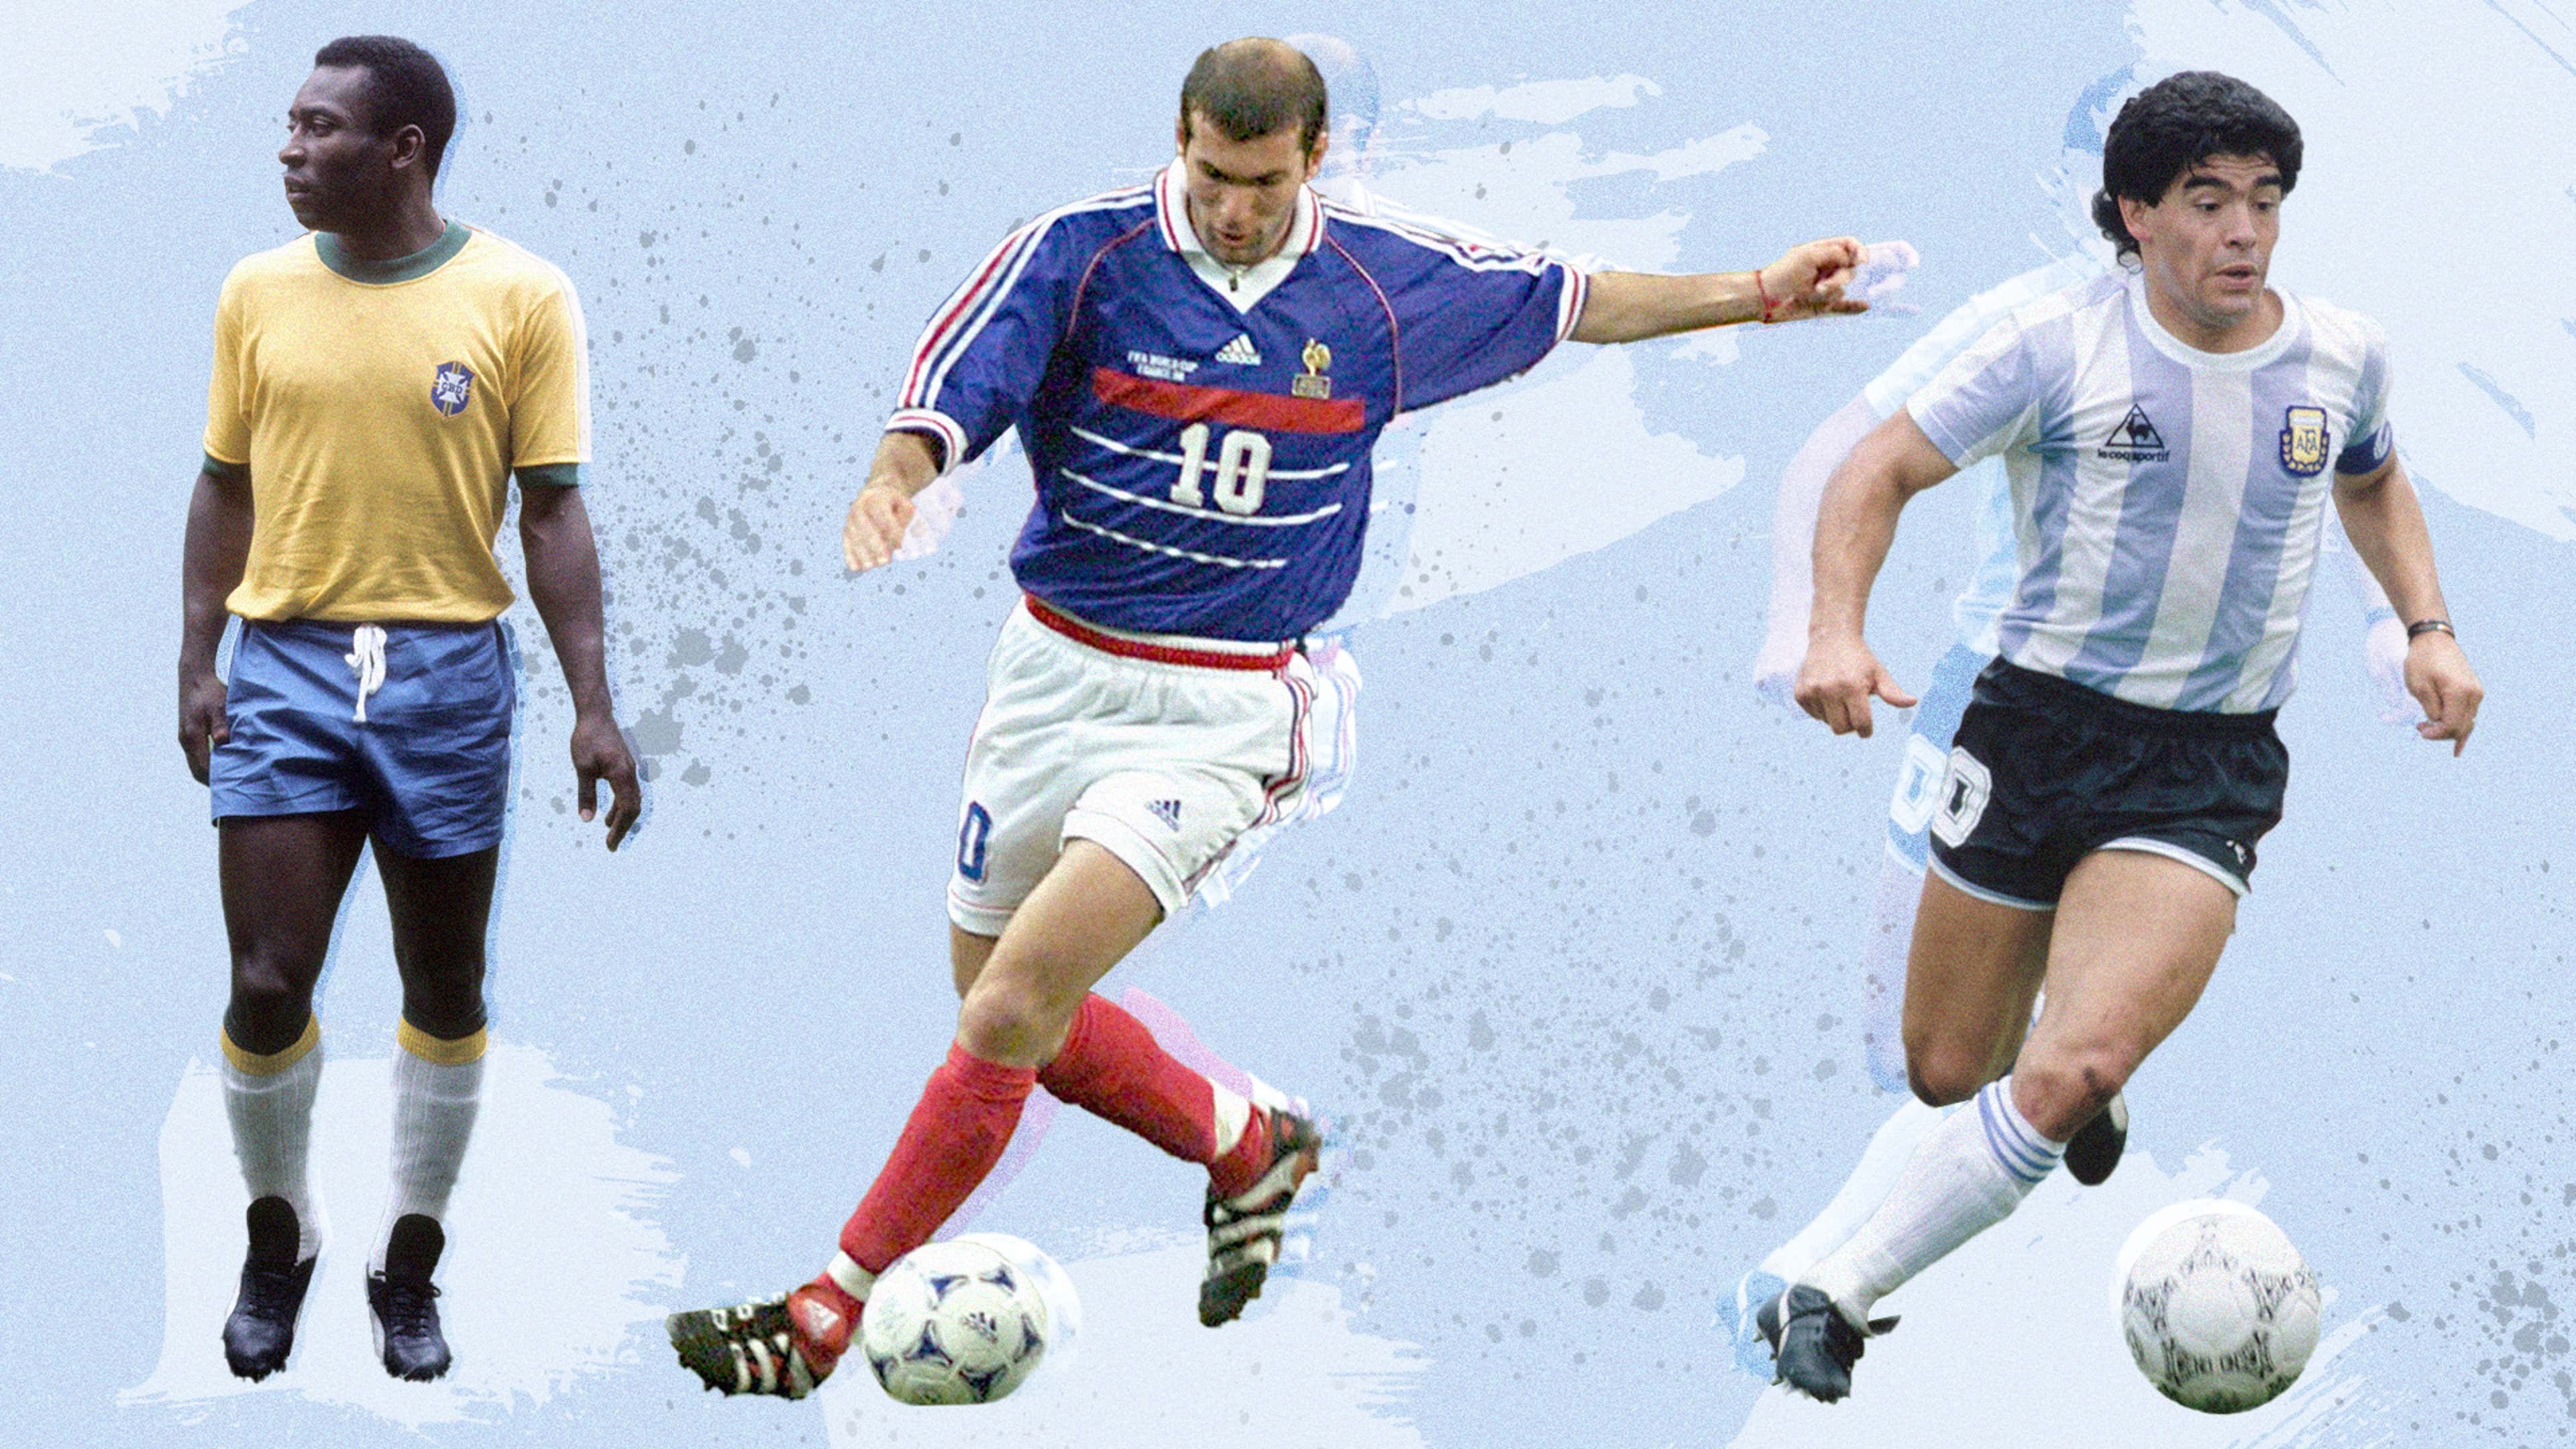 20 Best World Cup Jerseys of All Time